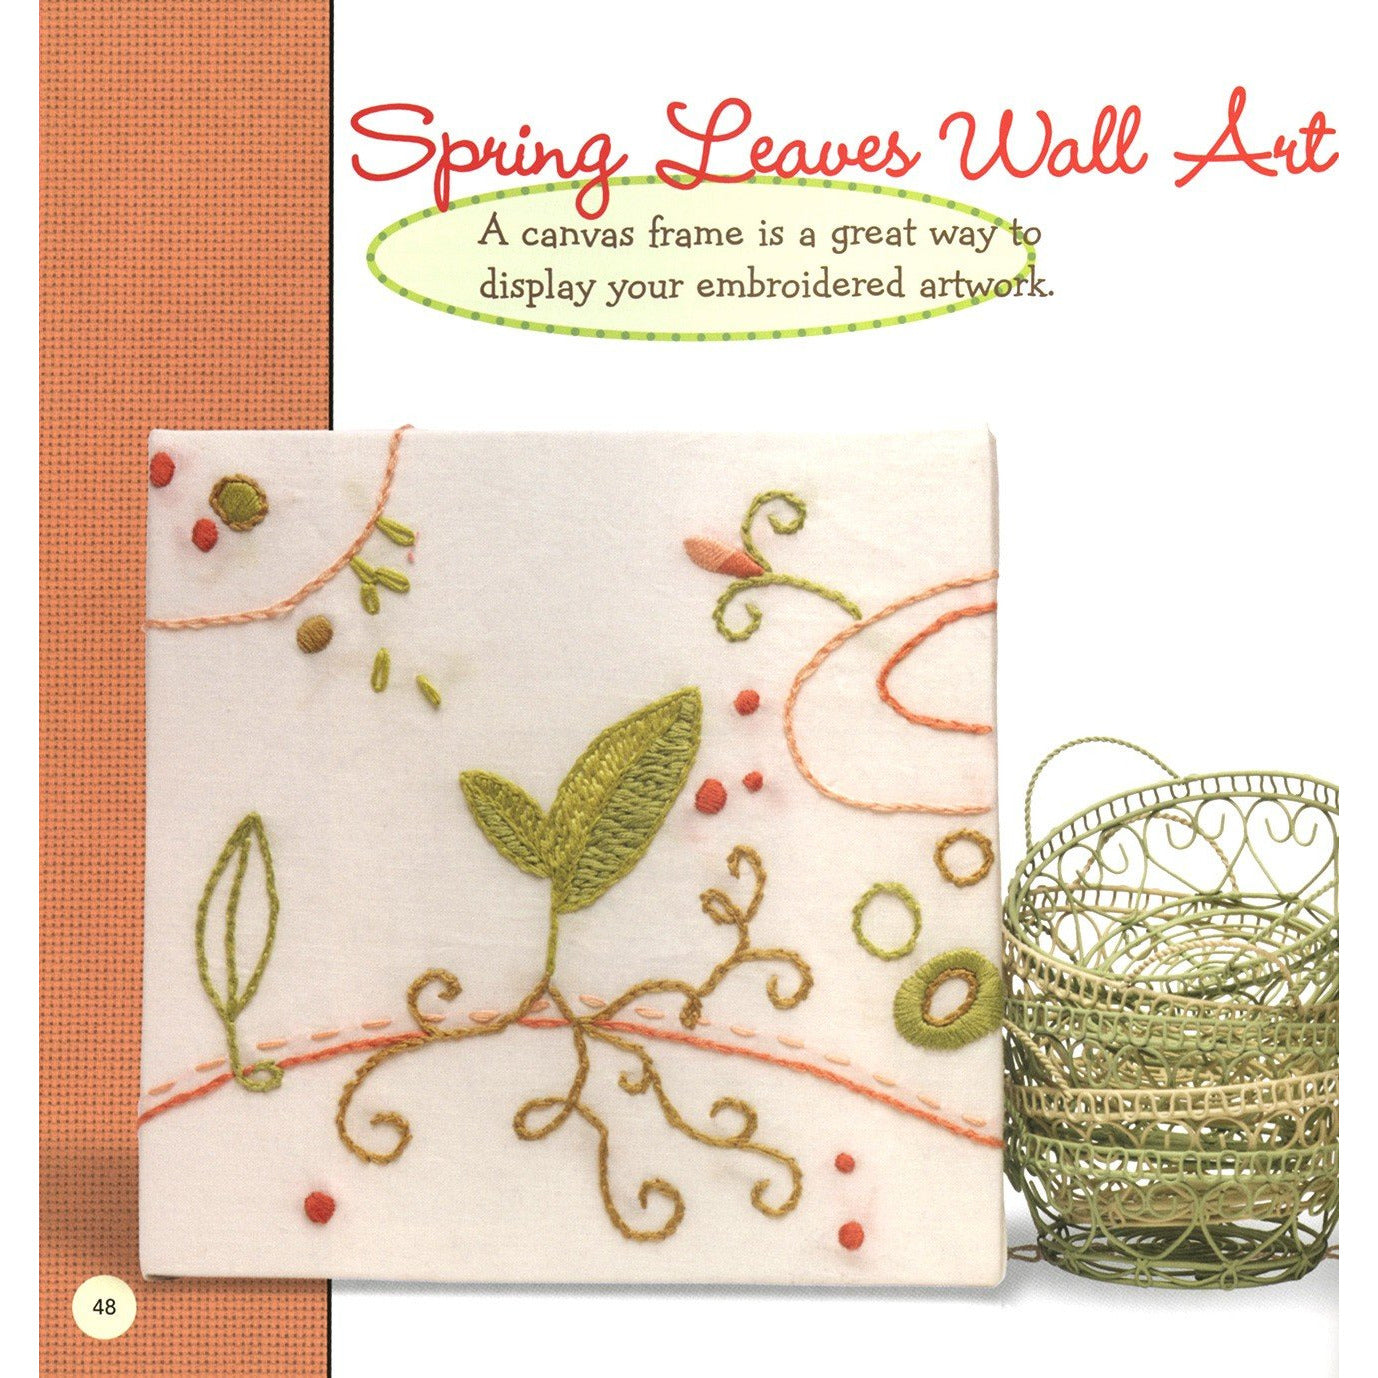 Doodle Stitching Transfer Pack book by Aimee Ray, Hand Embroidery